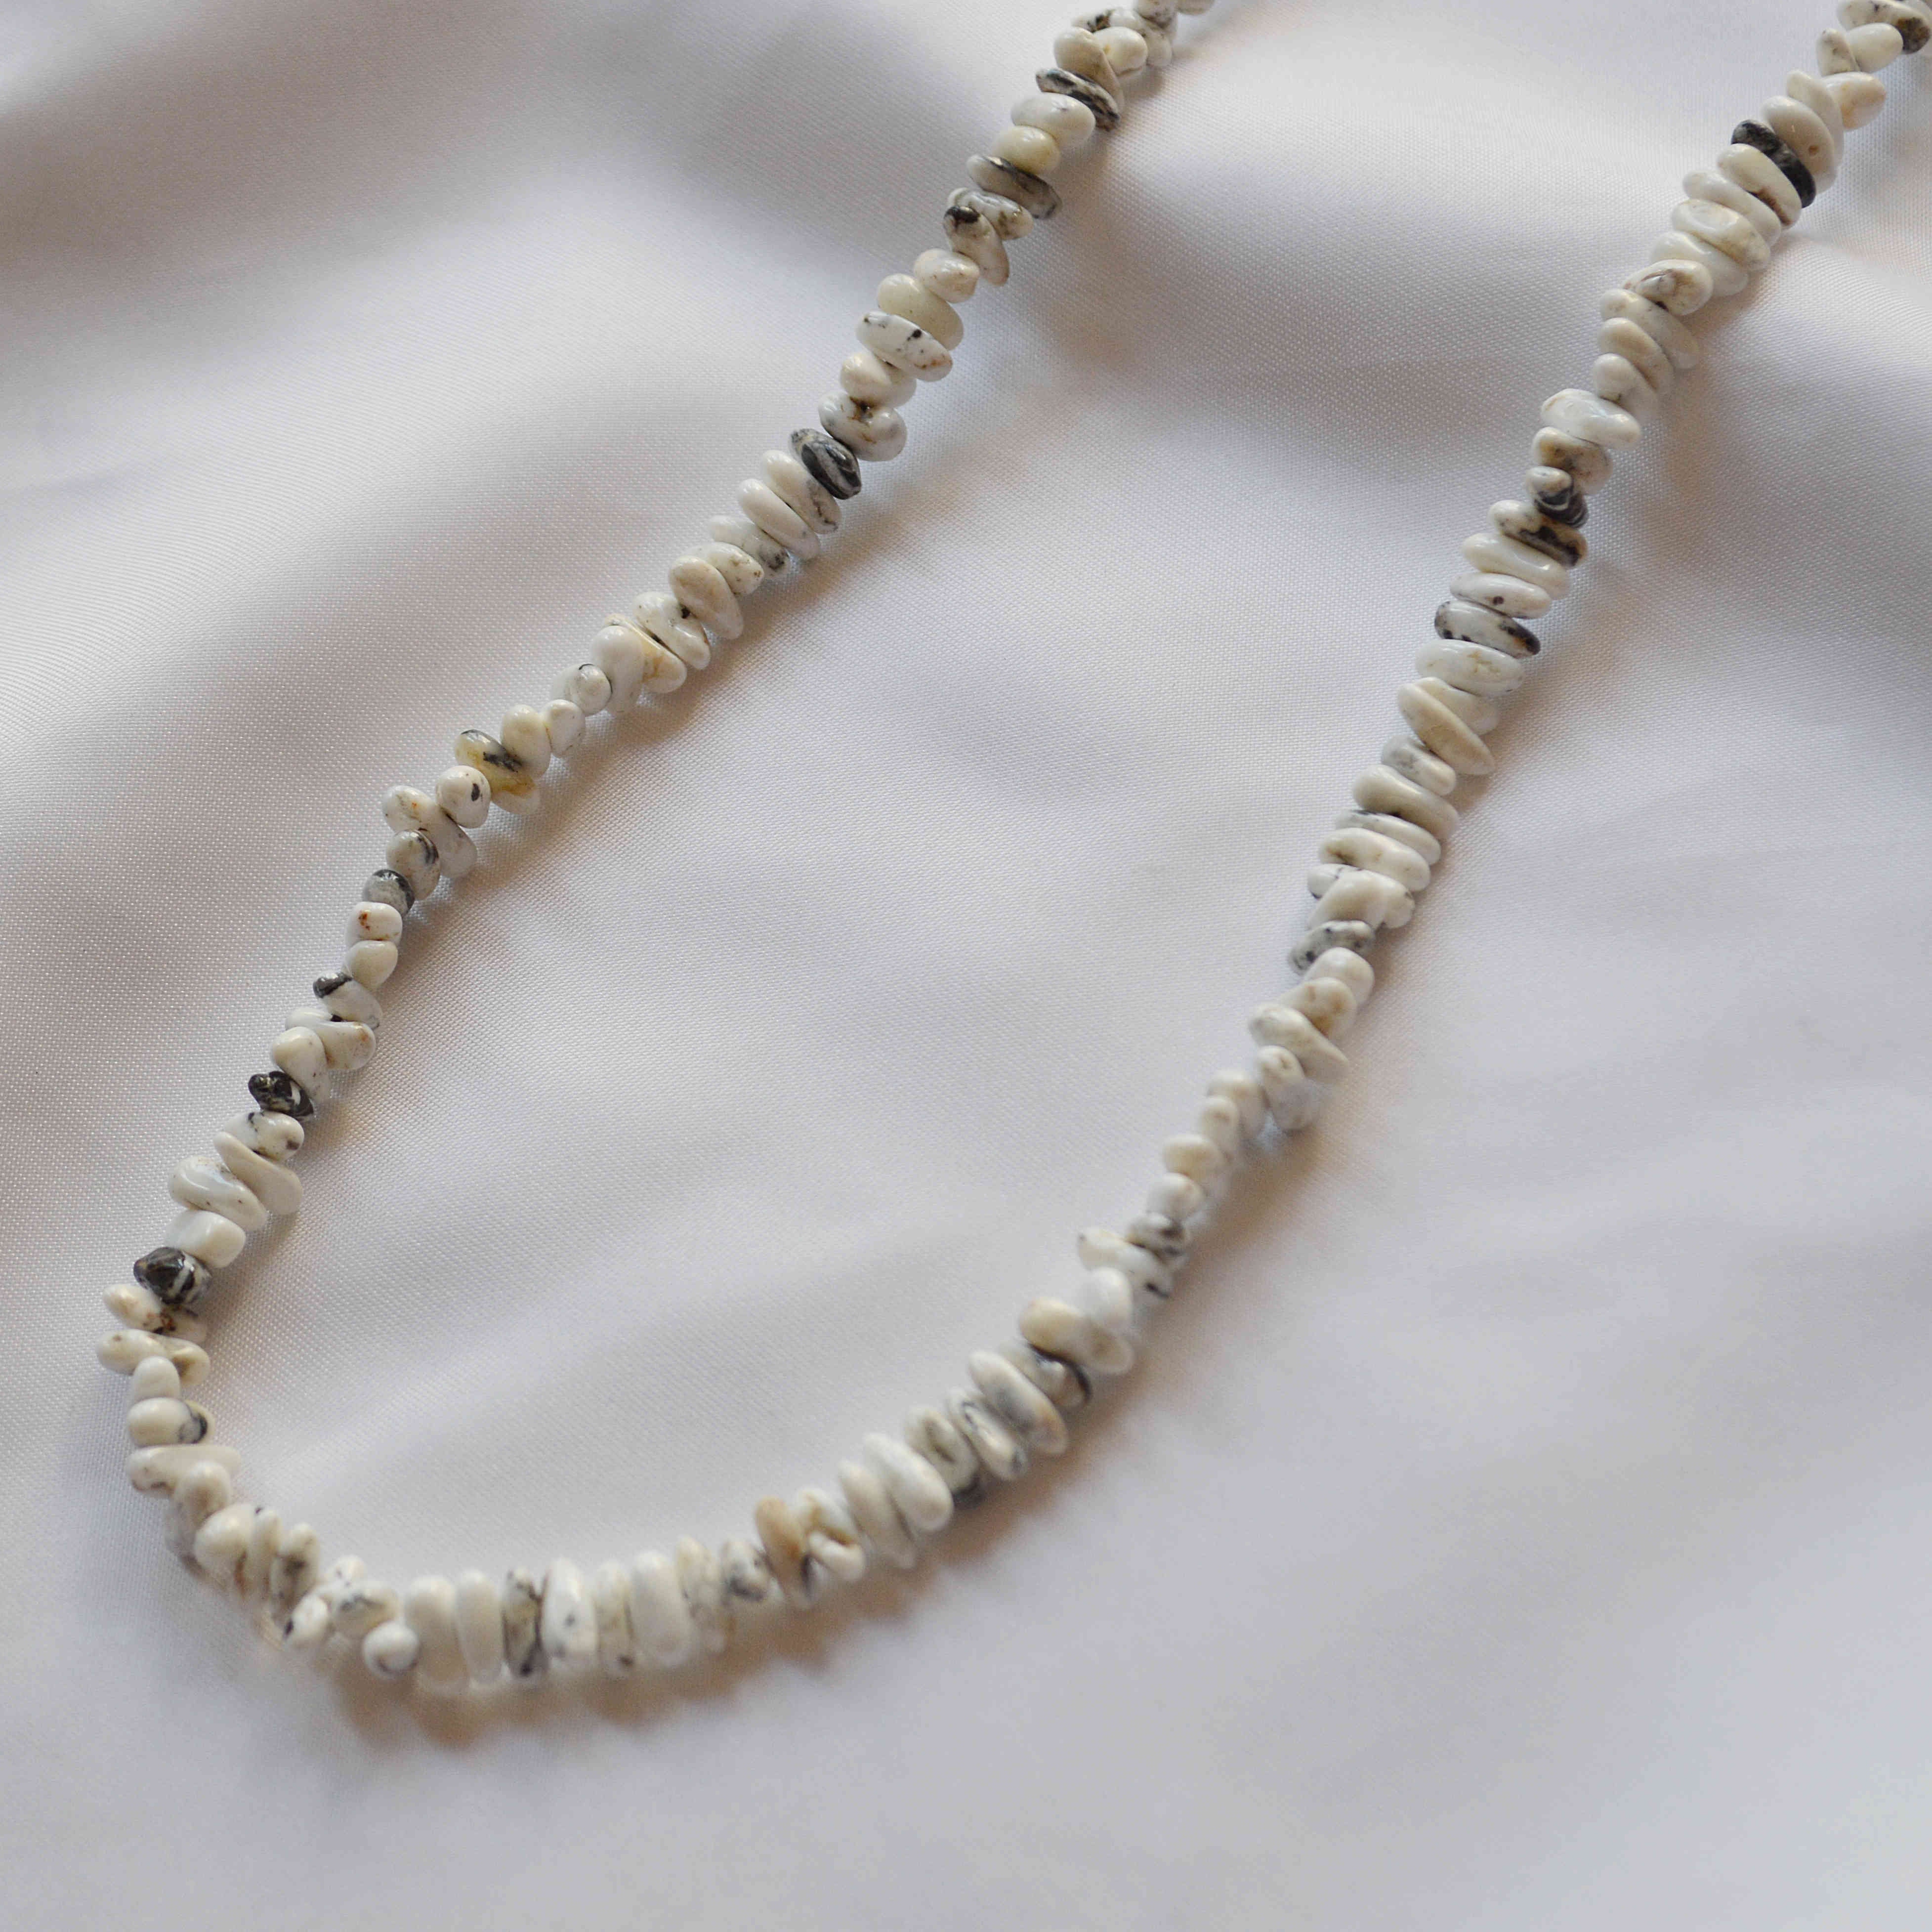 Indian jewelry インディアンジュエリー / Navajo Nugget Necklace ナヴァホナゲットネックレス (White Buffalo ホワイトバッファロー)